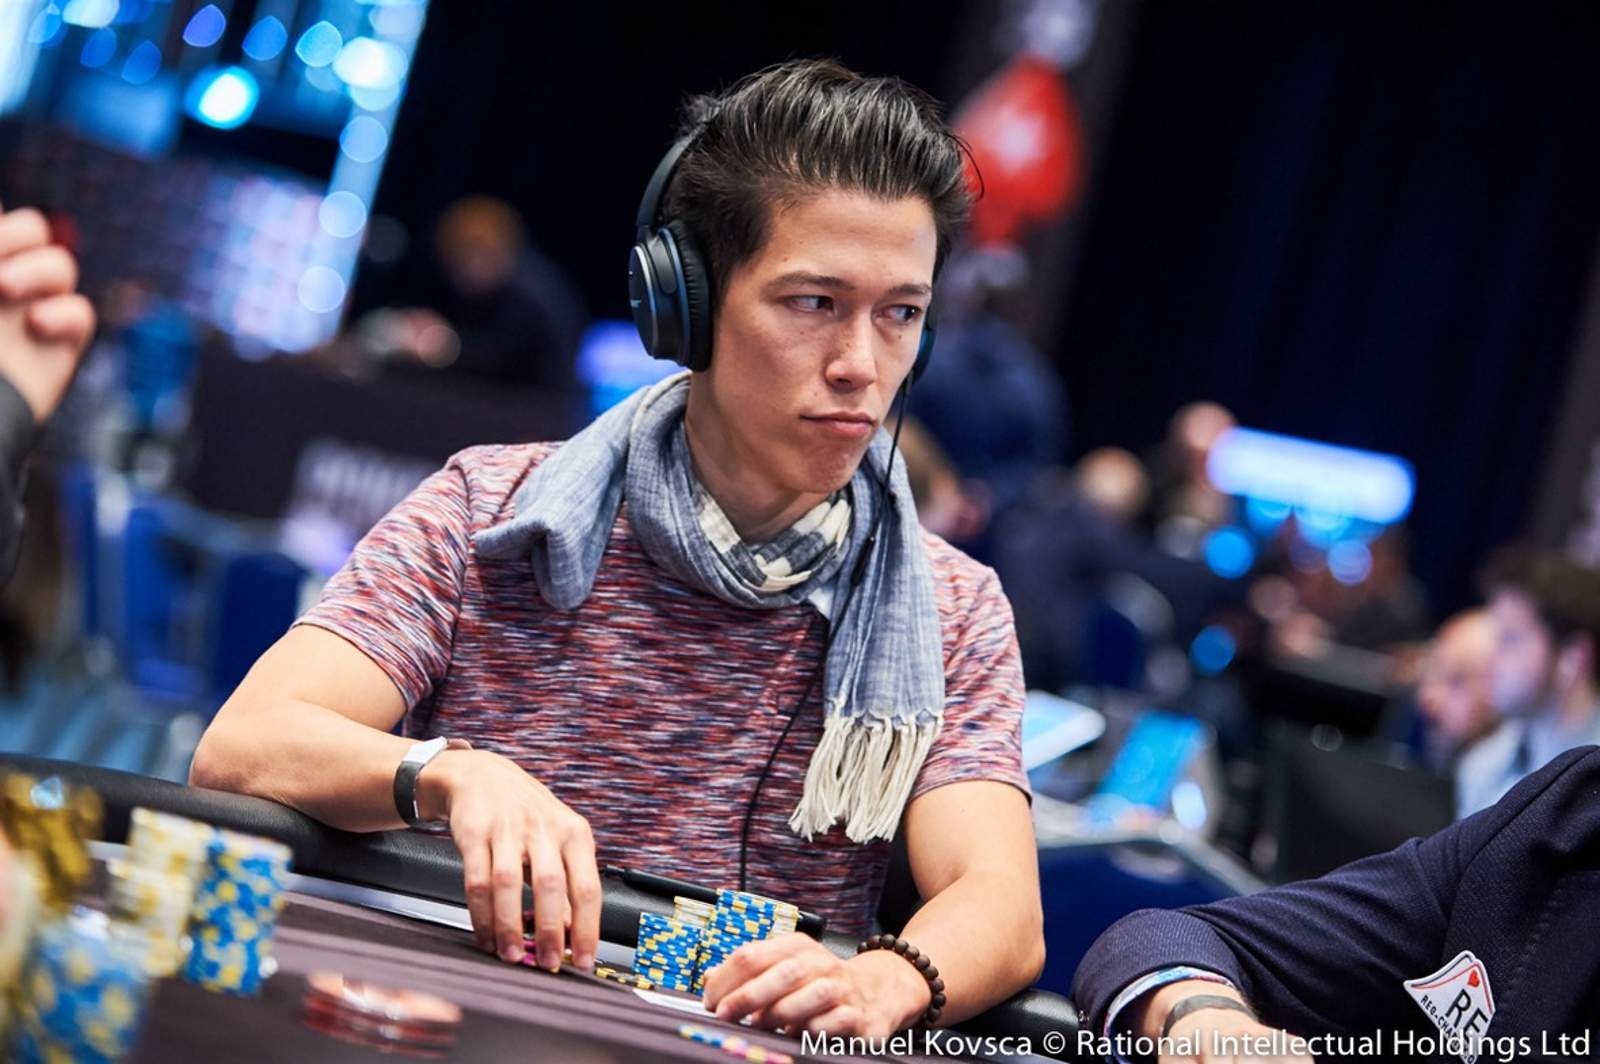 Thomas Muehloecker Leads High Roller After Three-Hour Bubble